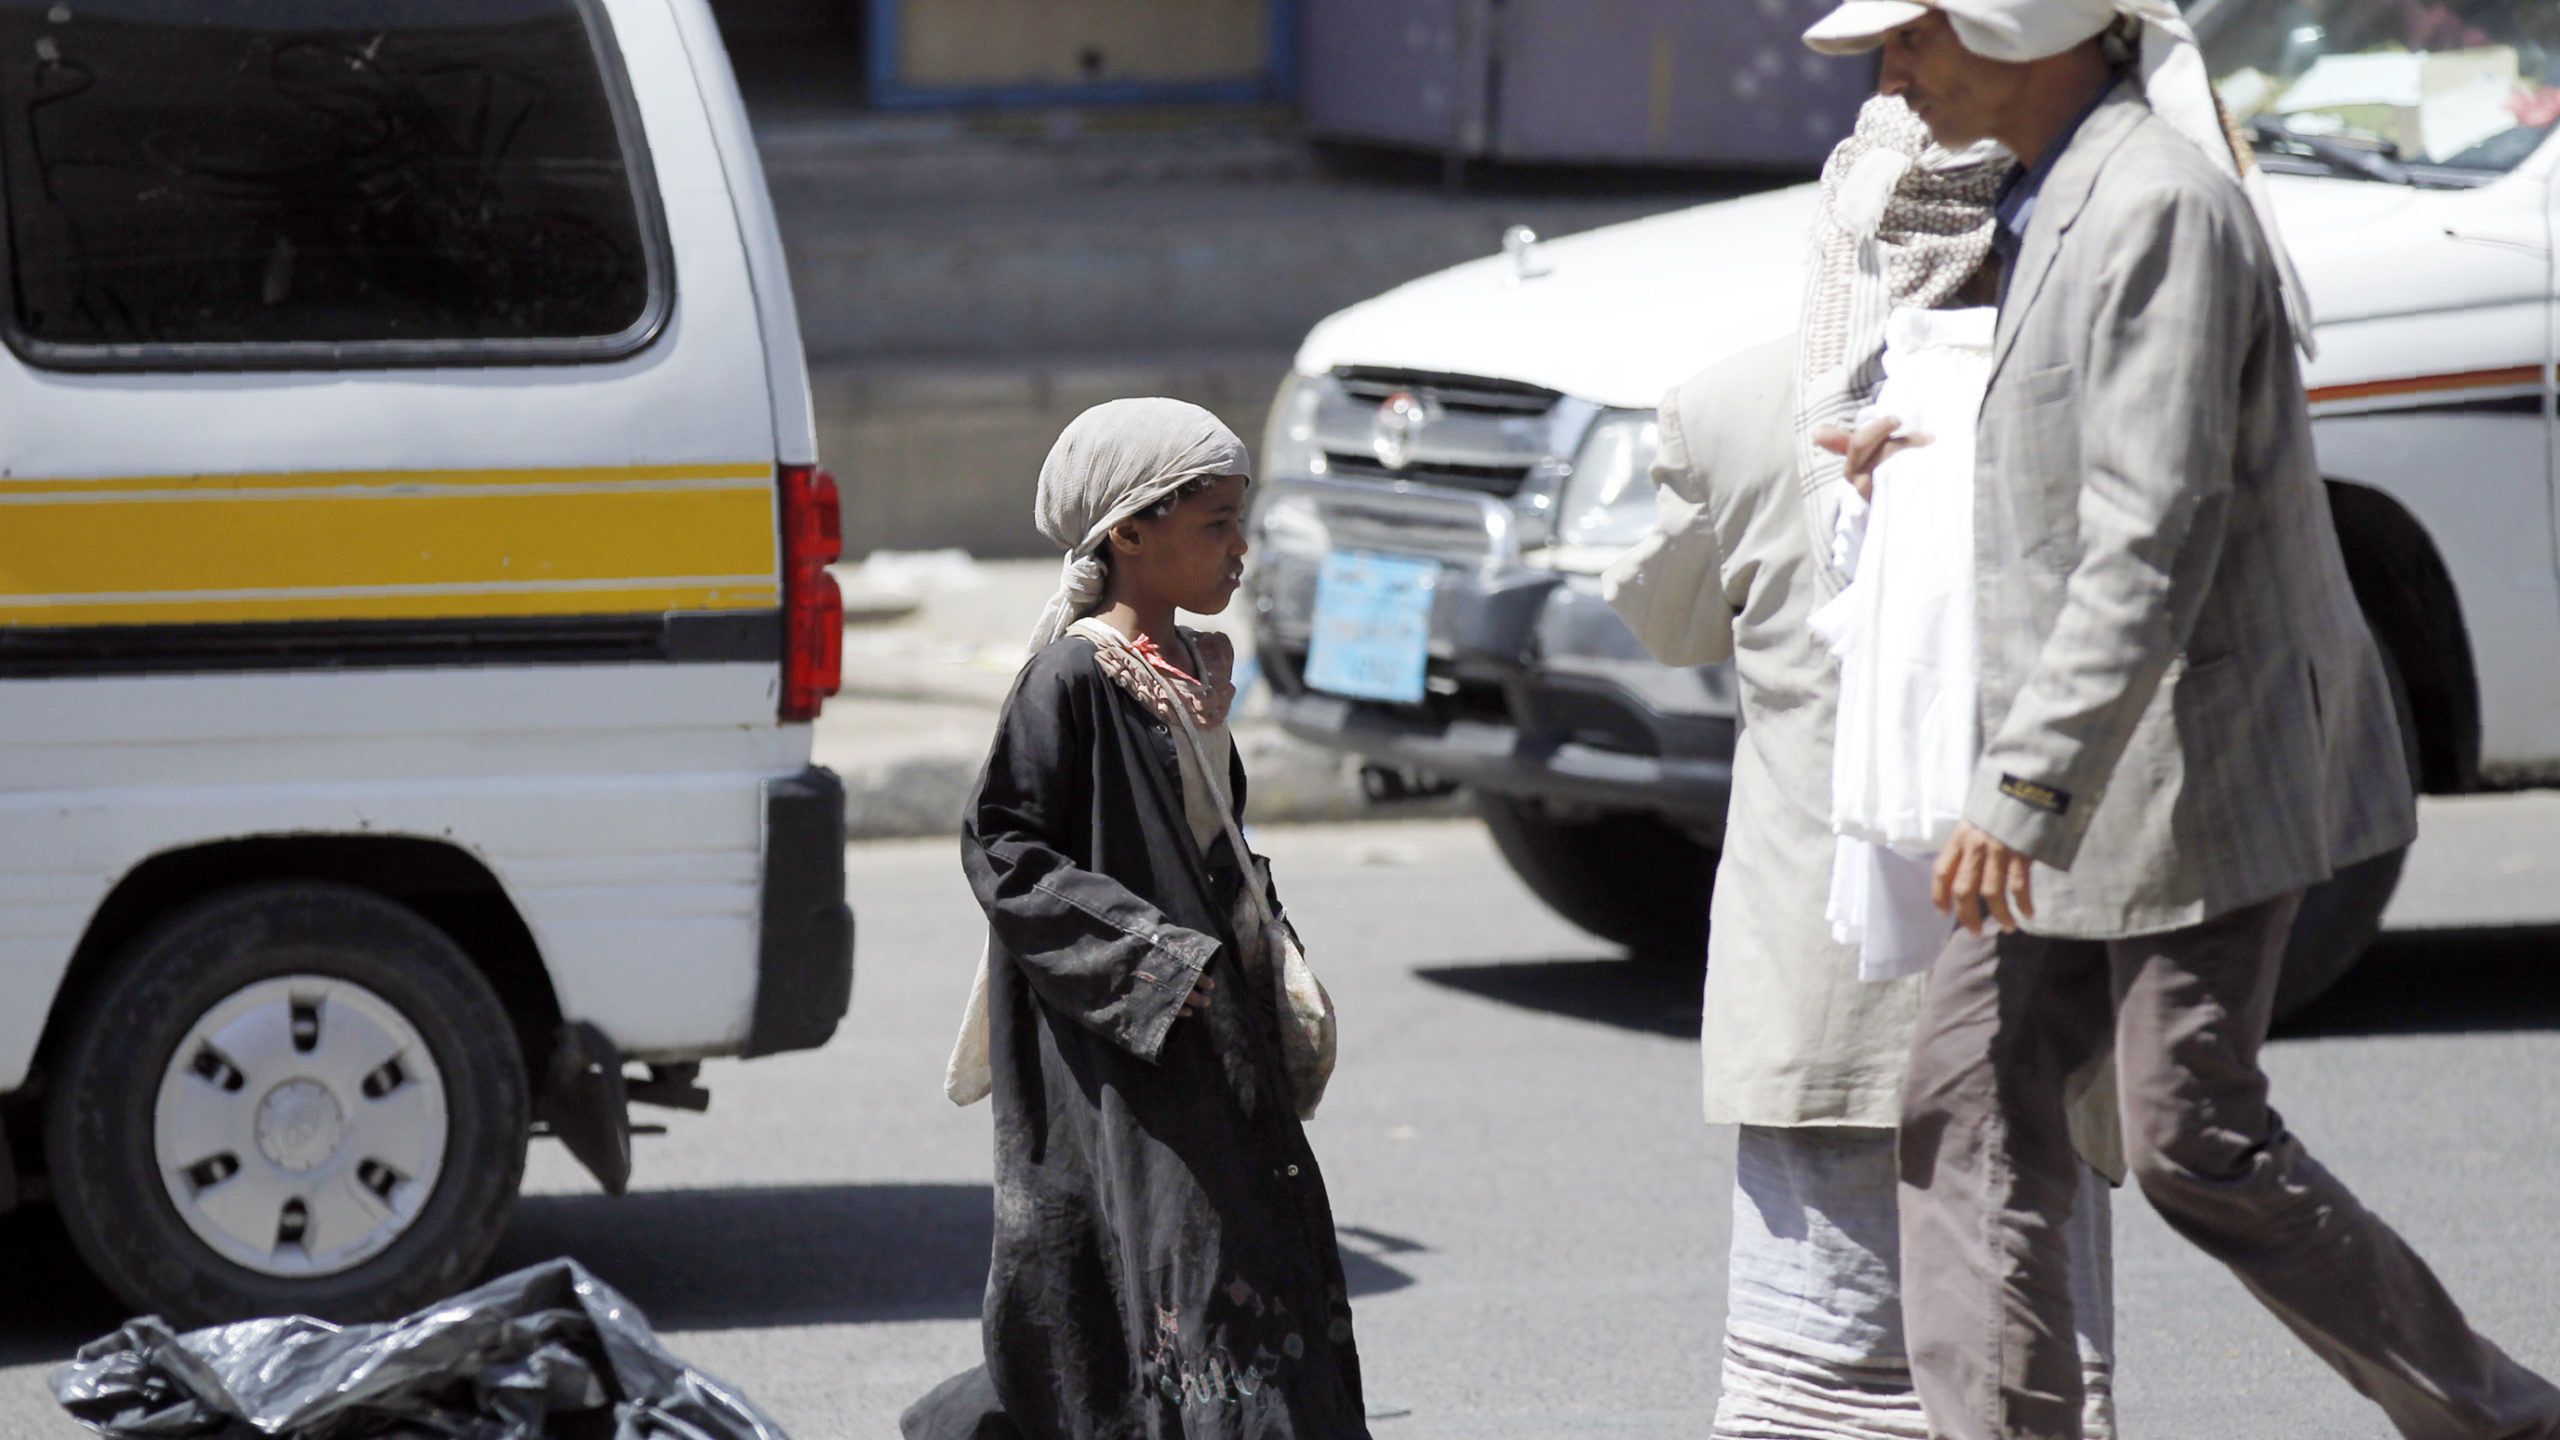 Juveniles in Yemen: Delinquents or Victims of War?